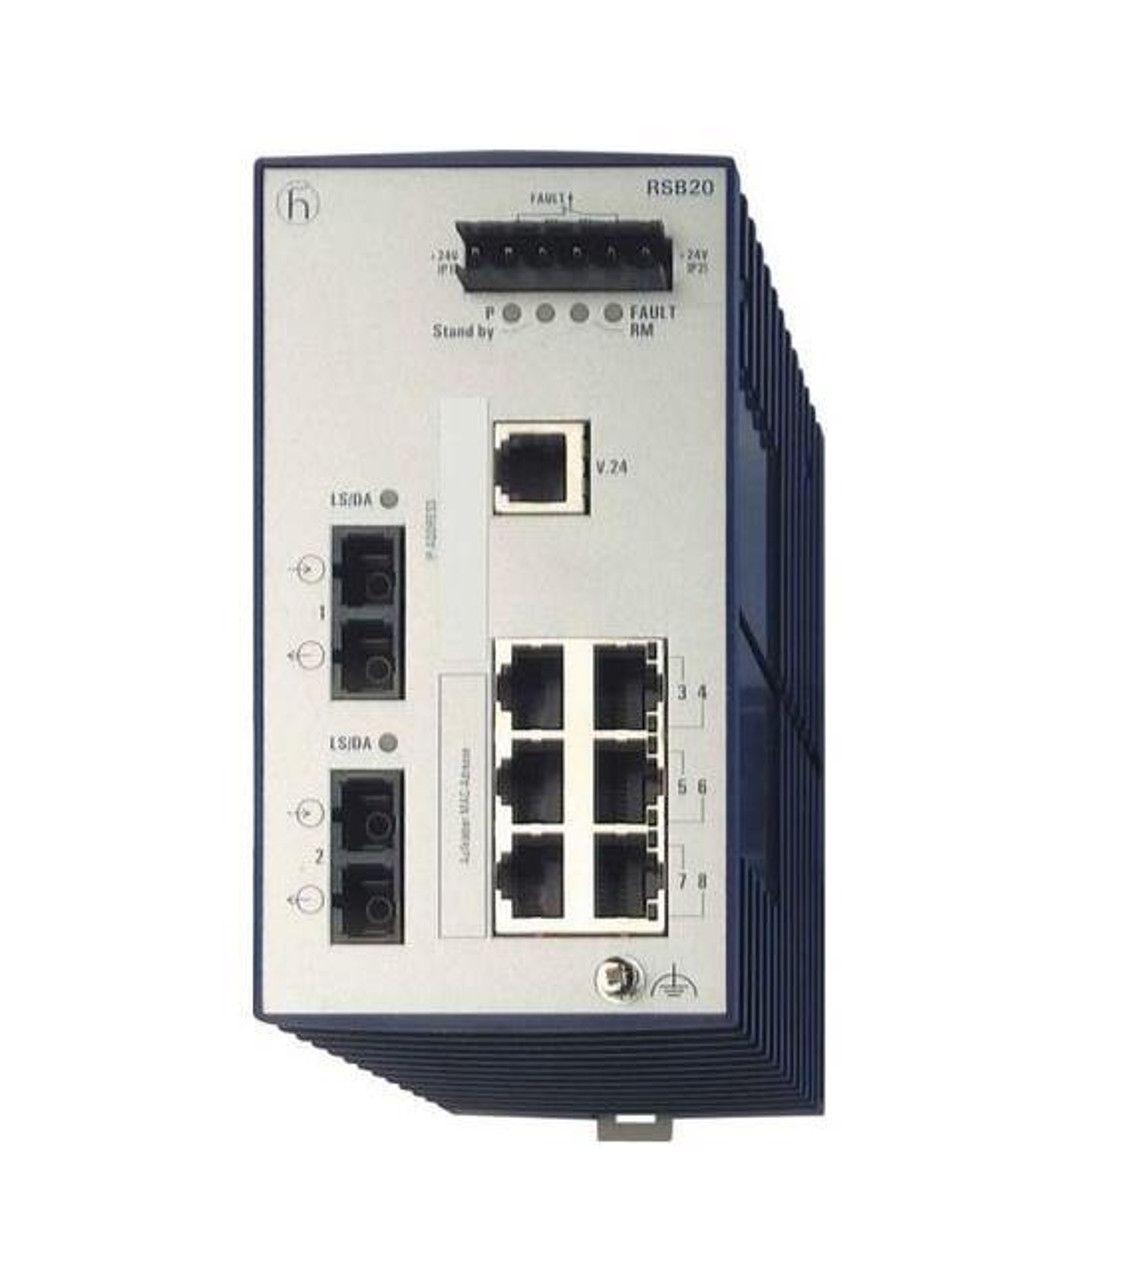 Hirschmann Mananaged Industrial Ethernet Rail Switch (Extended Temperature) with 6 RJ45 Fast (100 Mbps) Copper Ports and 2 Fast (10/100) Fiber